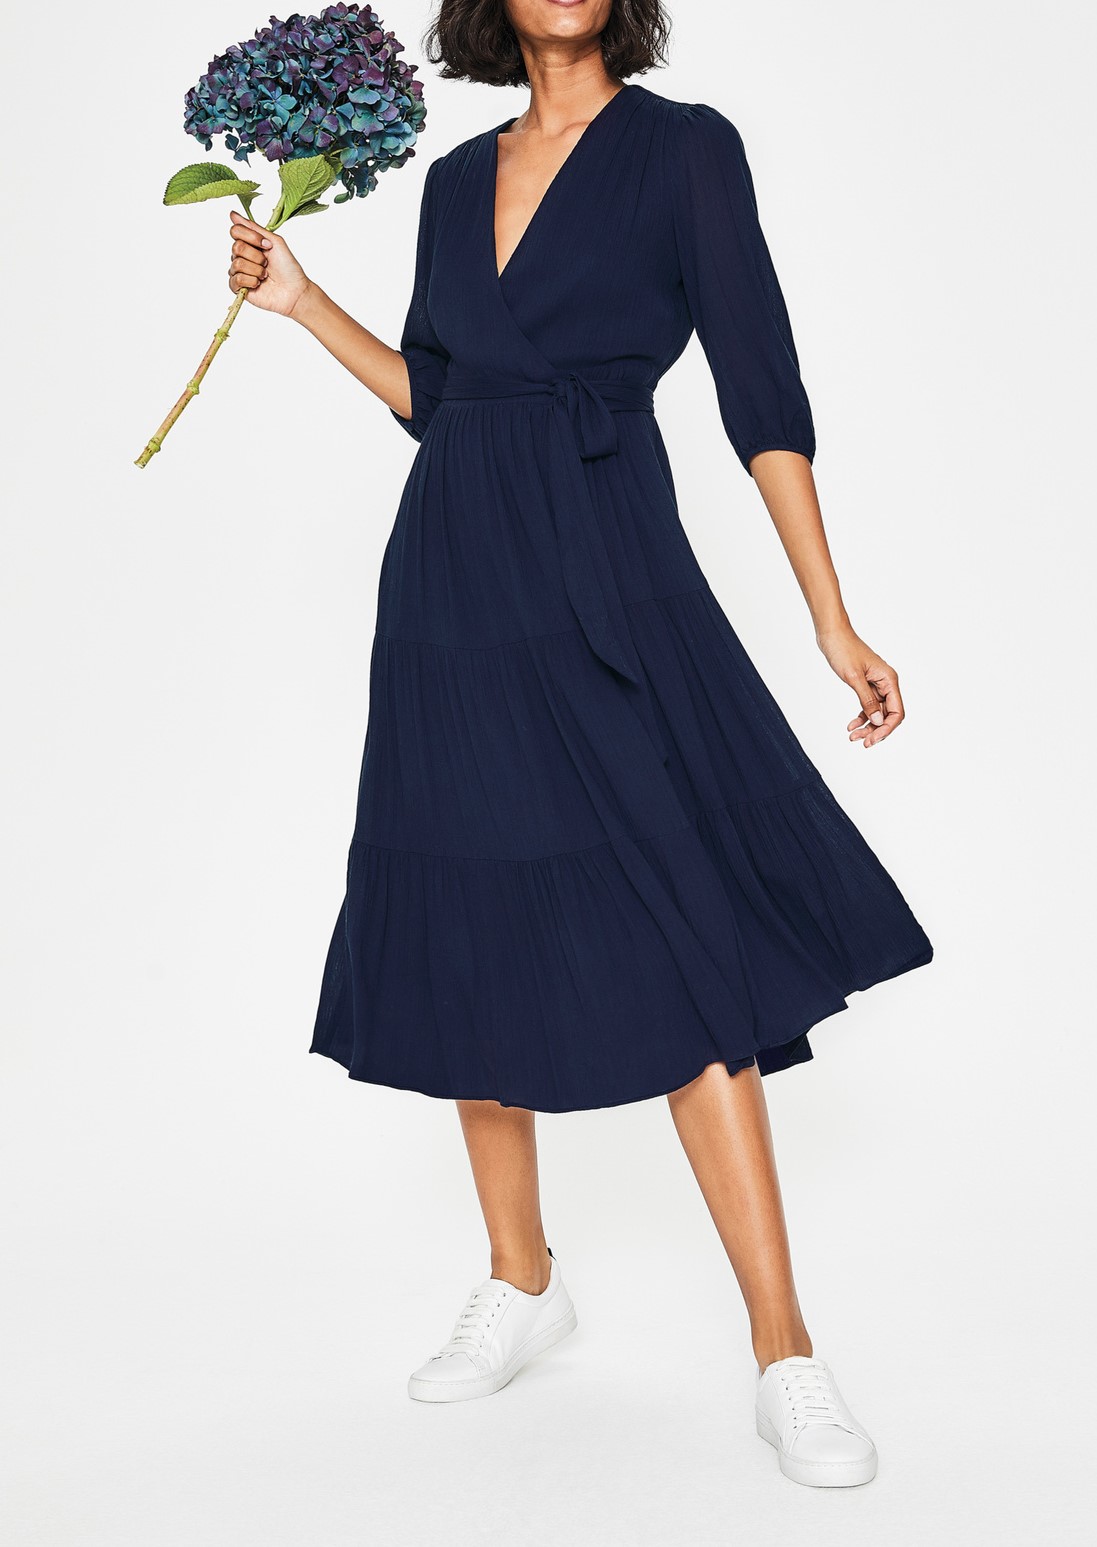 cocktail dresses for over 50s uk